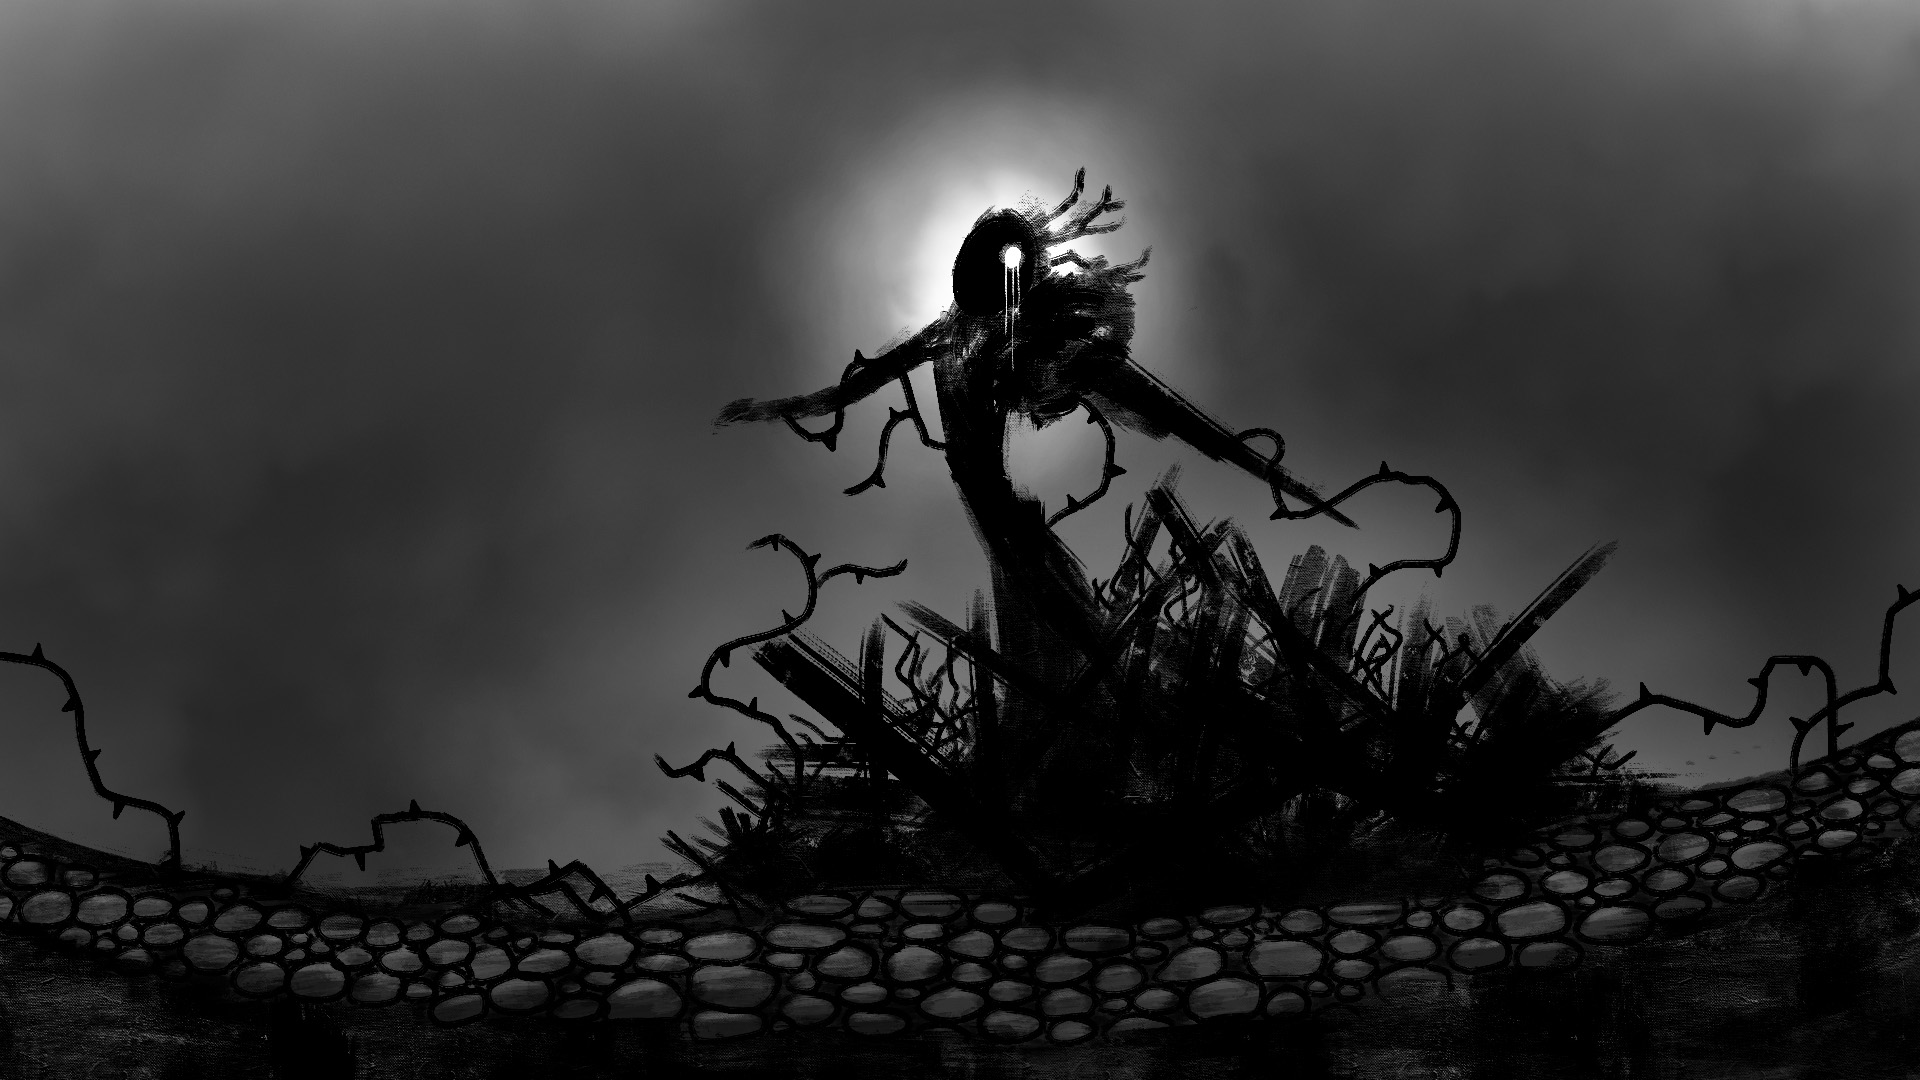 Games Art and Design work by Jamie Wood showing a shadowy figure atop an old pyre, surrounded by a cobblestone pathway